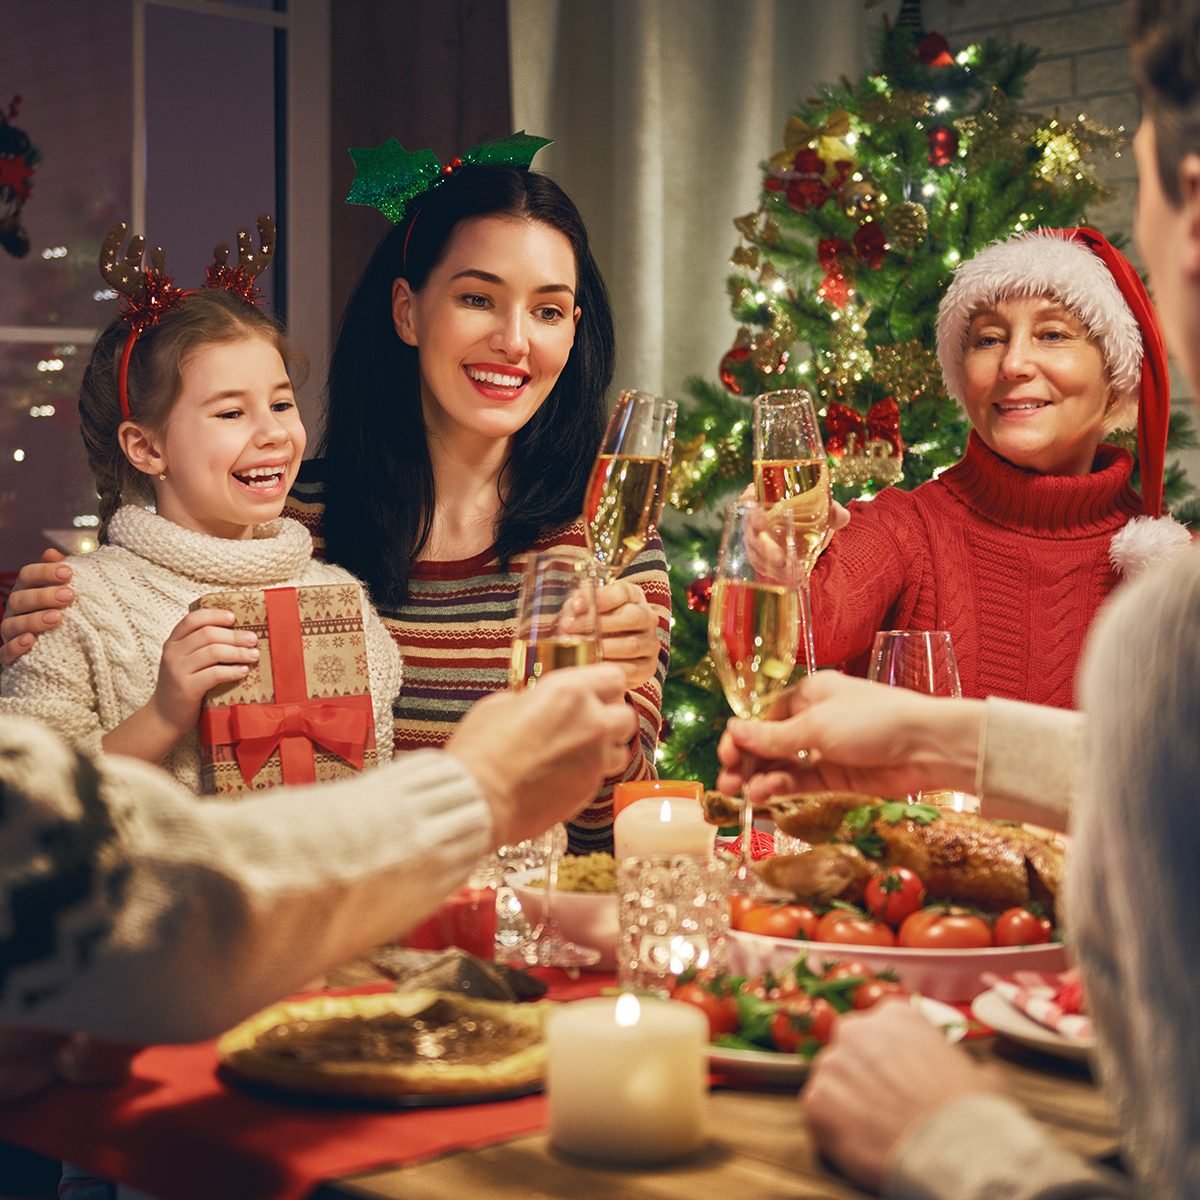 11 Simple Secrets from Mom for Holiday Meal Planning Success